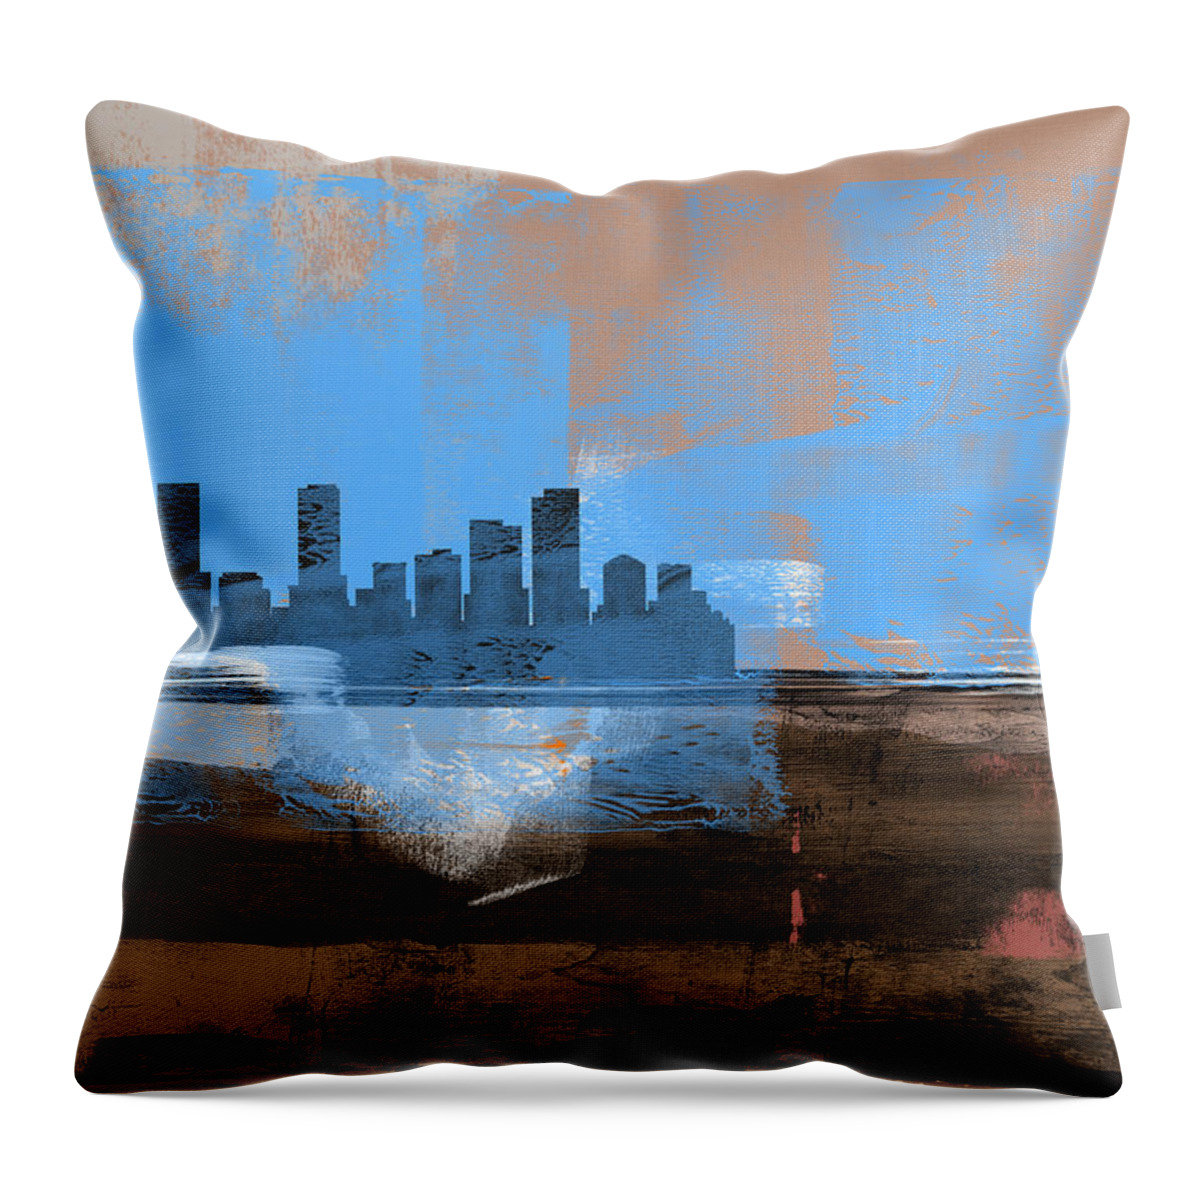 Denver Throw Pillow featuring the mixed media Denver Abstract Skyline I by Naxart Studio